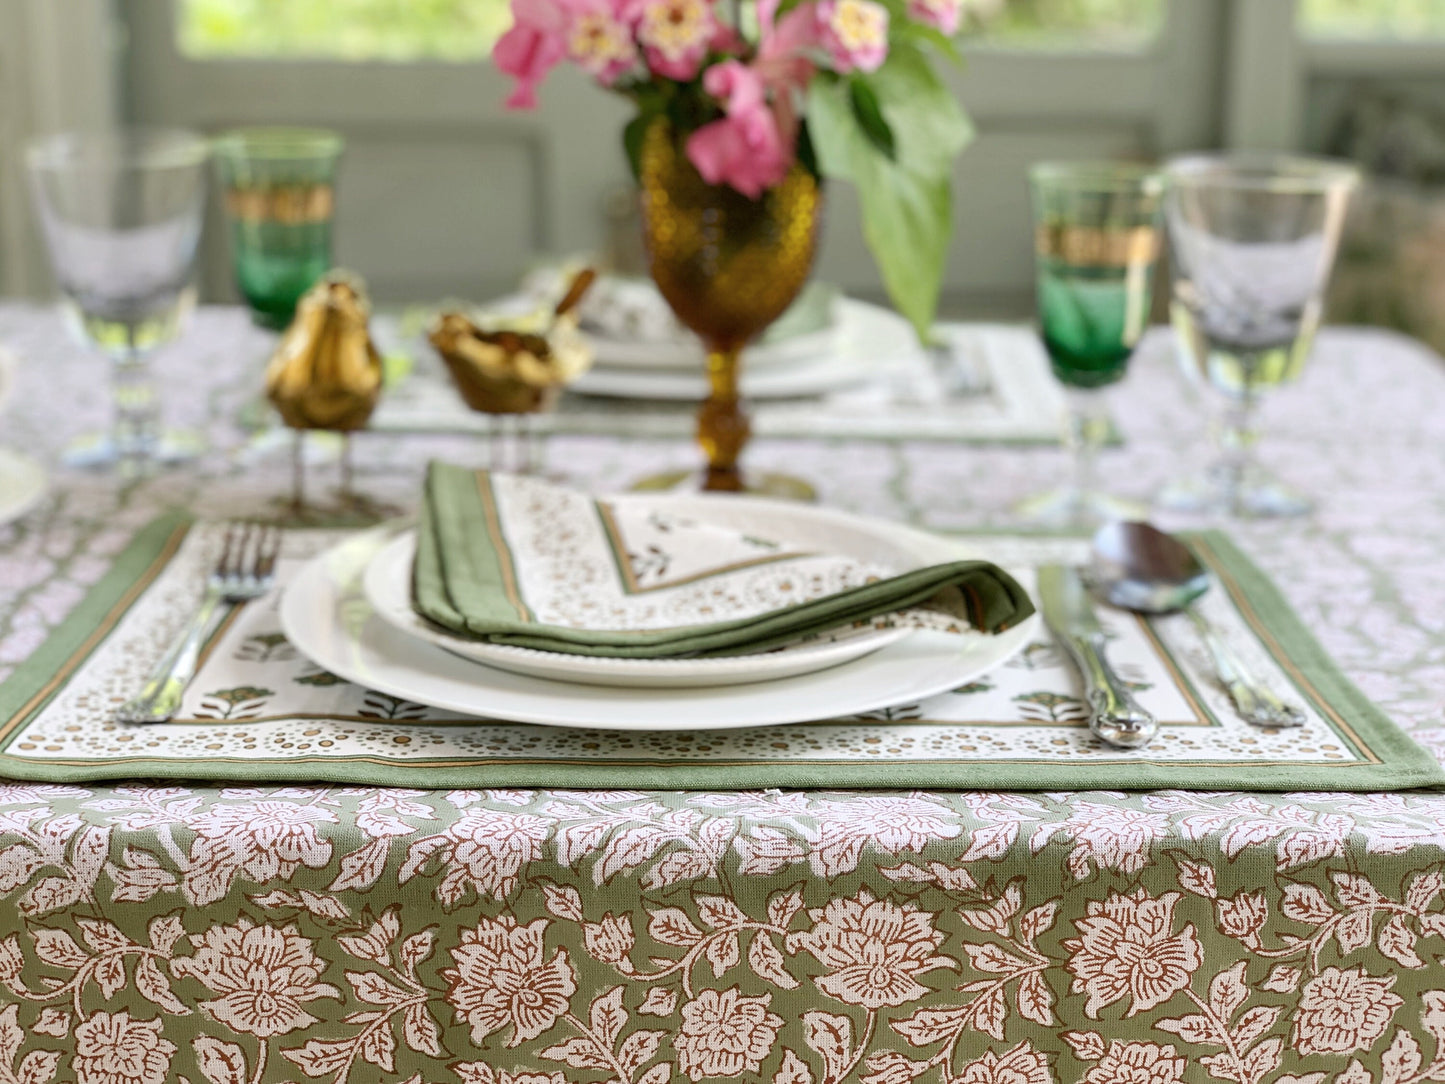 Pure cotton block print tablecloth handmade in India · Six diners · Boho chic tablecloth 100% Indian cotton · Sage green